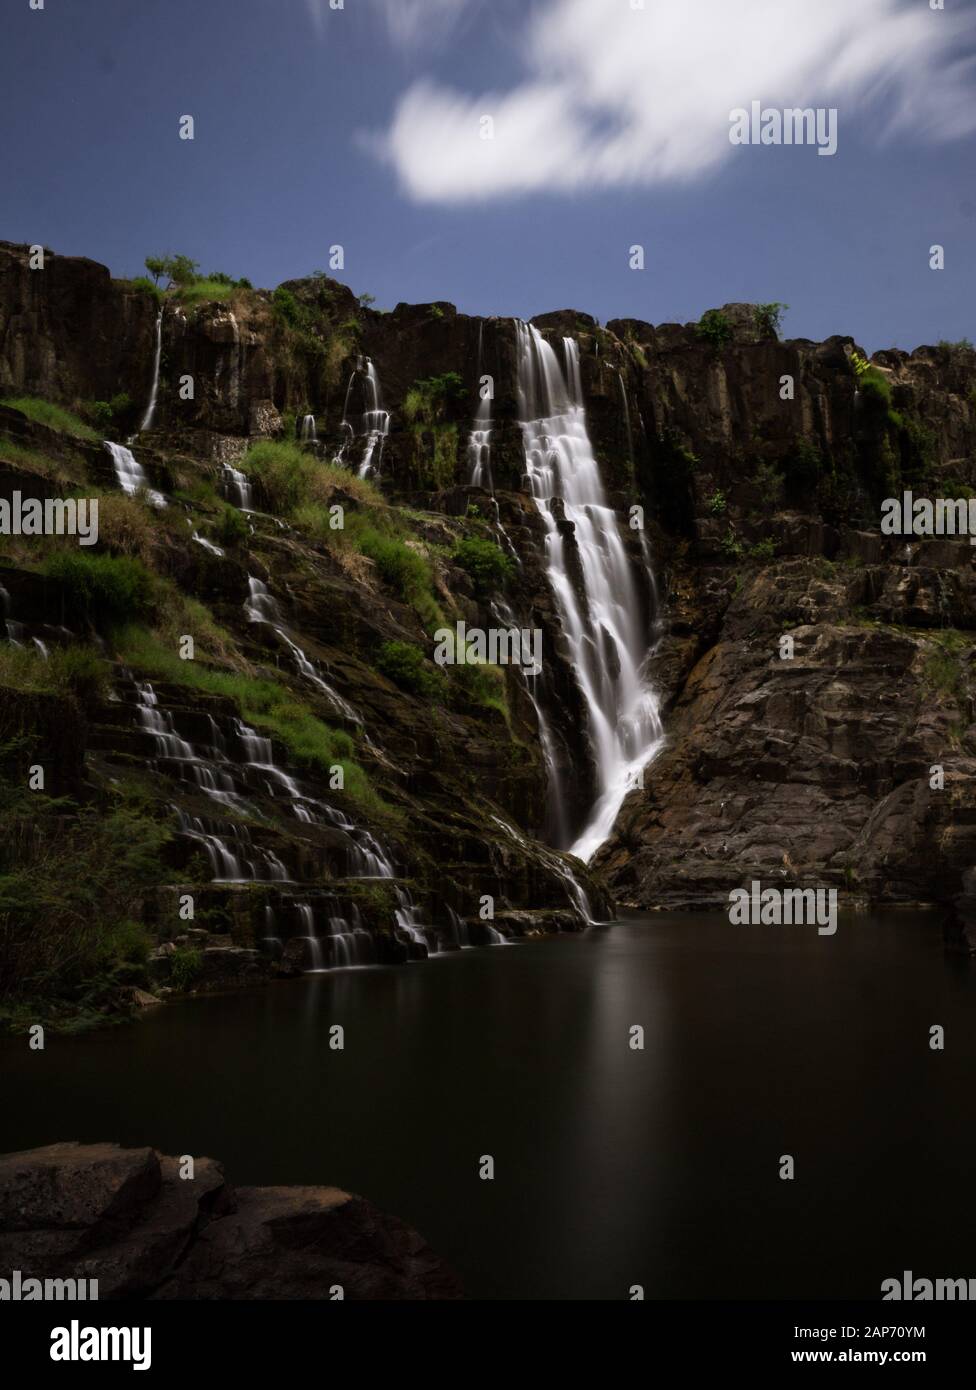 Long-time exposure of Pongour waterfalls nearby Da Lat, Vietnam, on a sunny day with smooth lake surface and flowing water Stock Photo